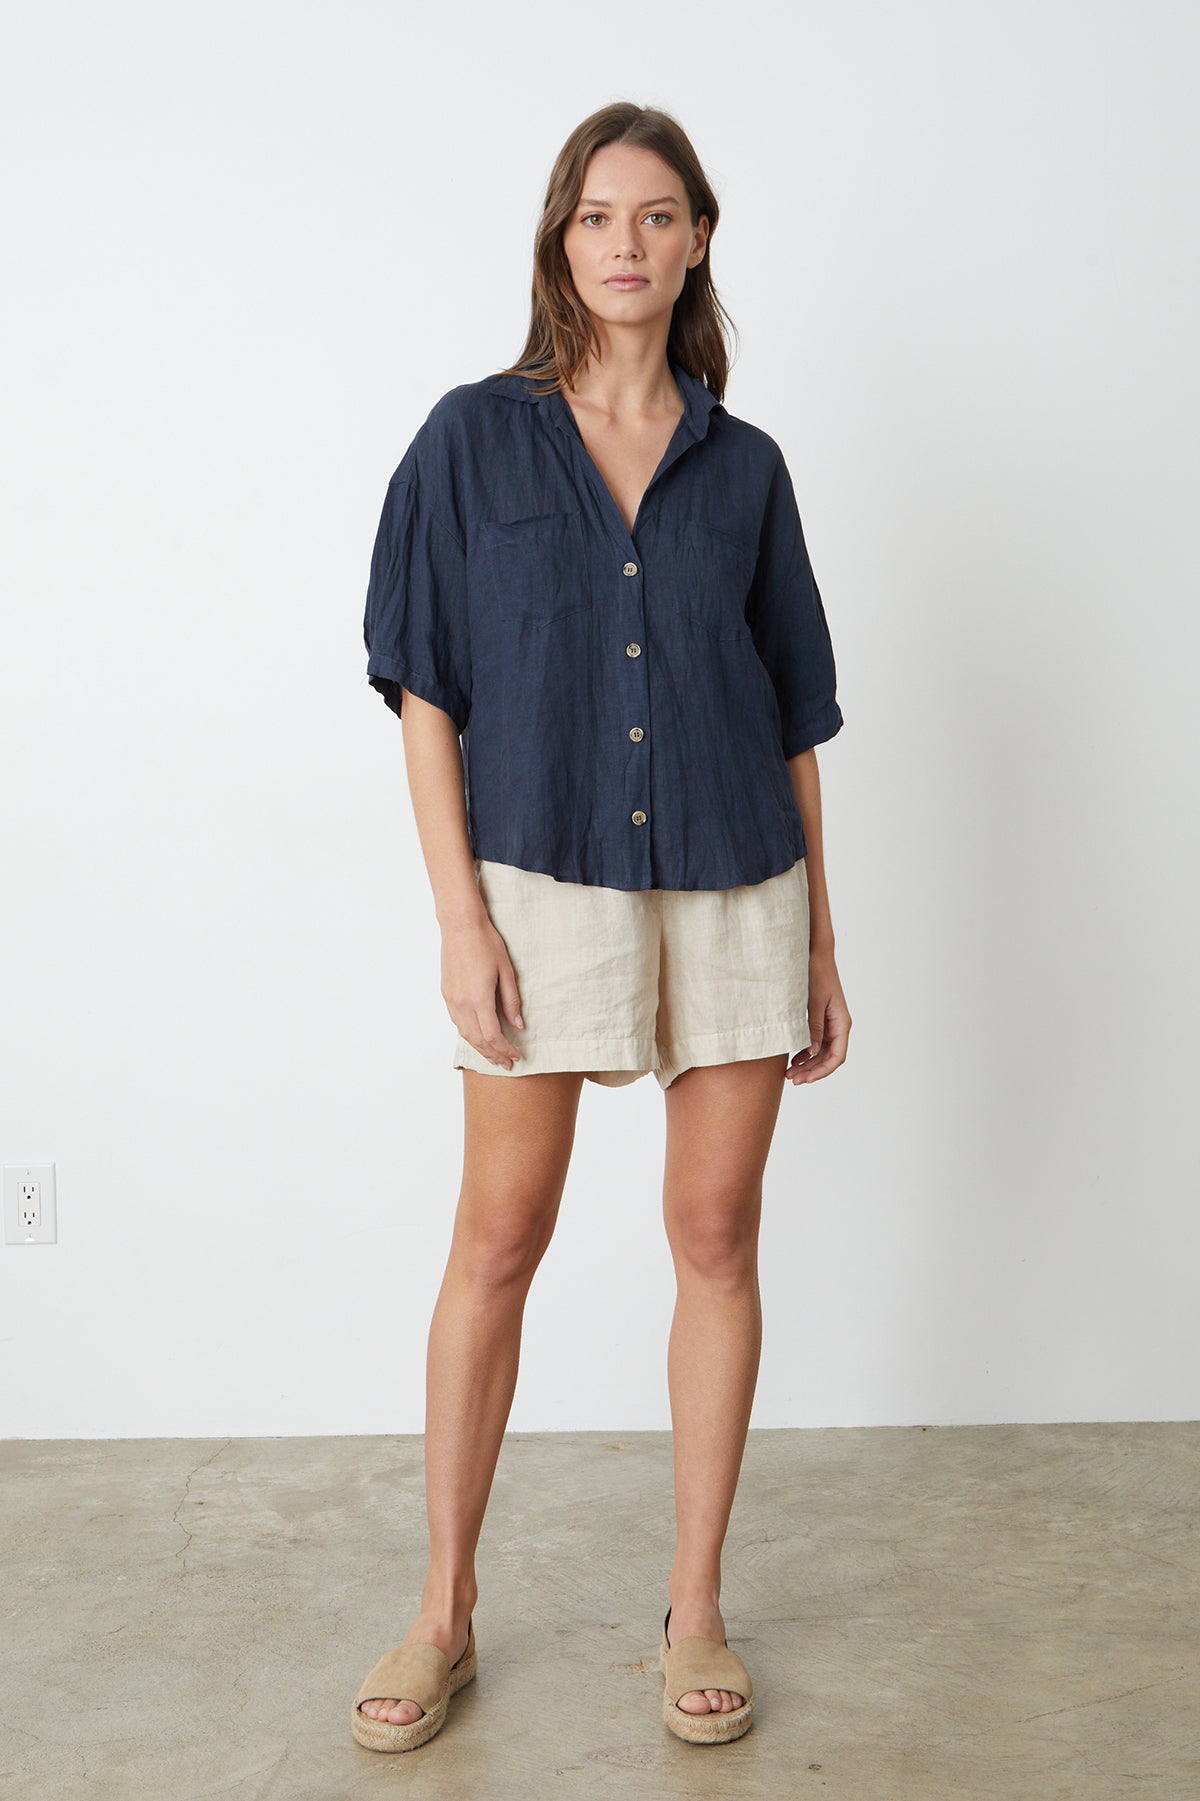 The model is wearing a MARIA LINEN BUTTON-UP SHIRT by Velvet by Graham & Spencer and tan shorts.-26262343319745